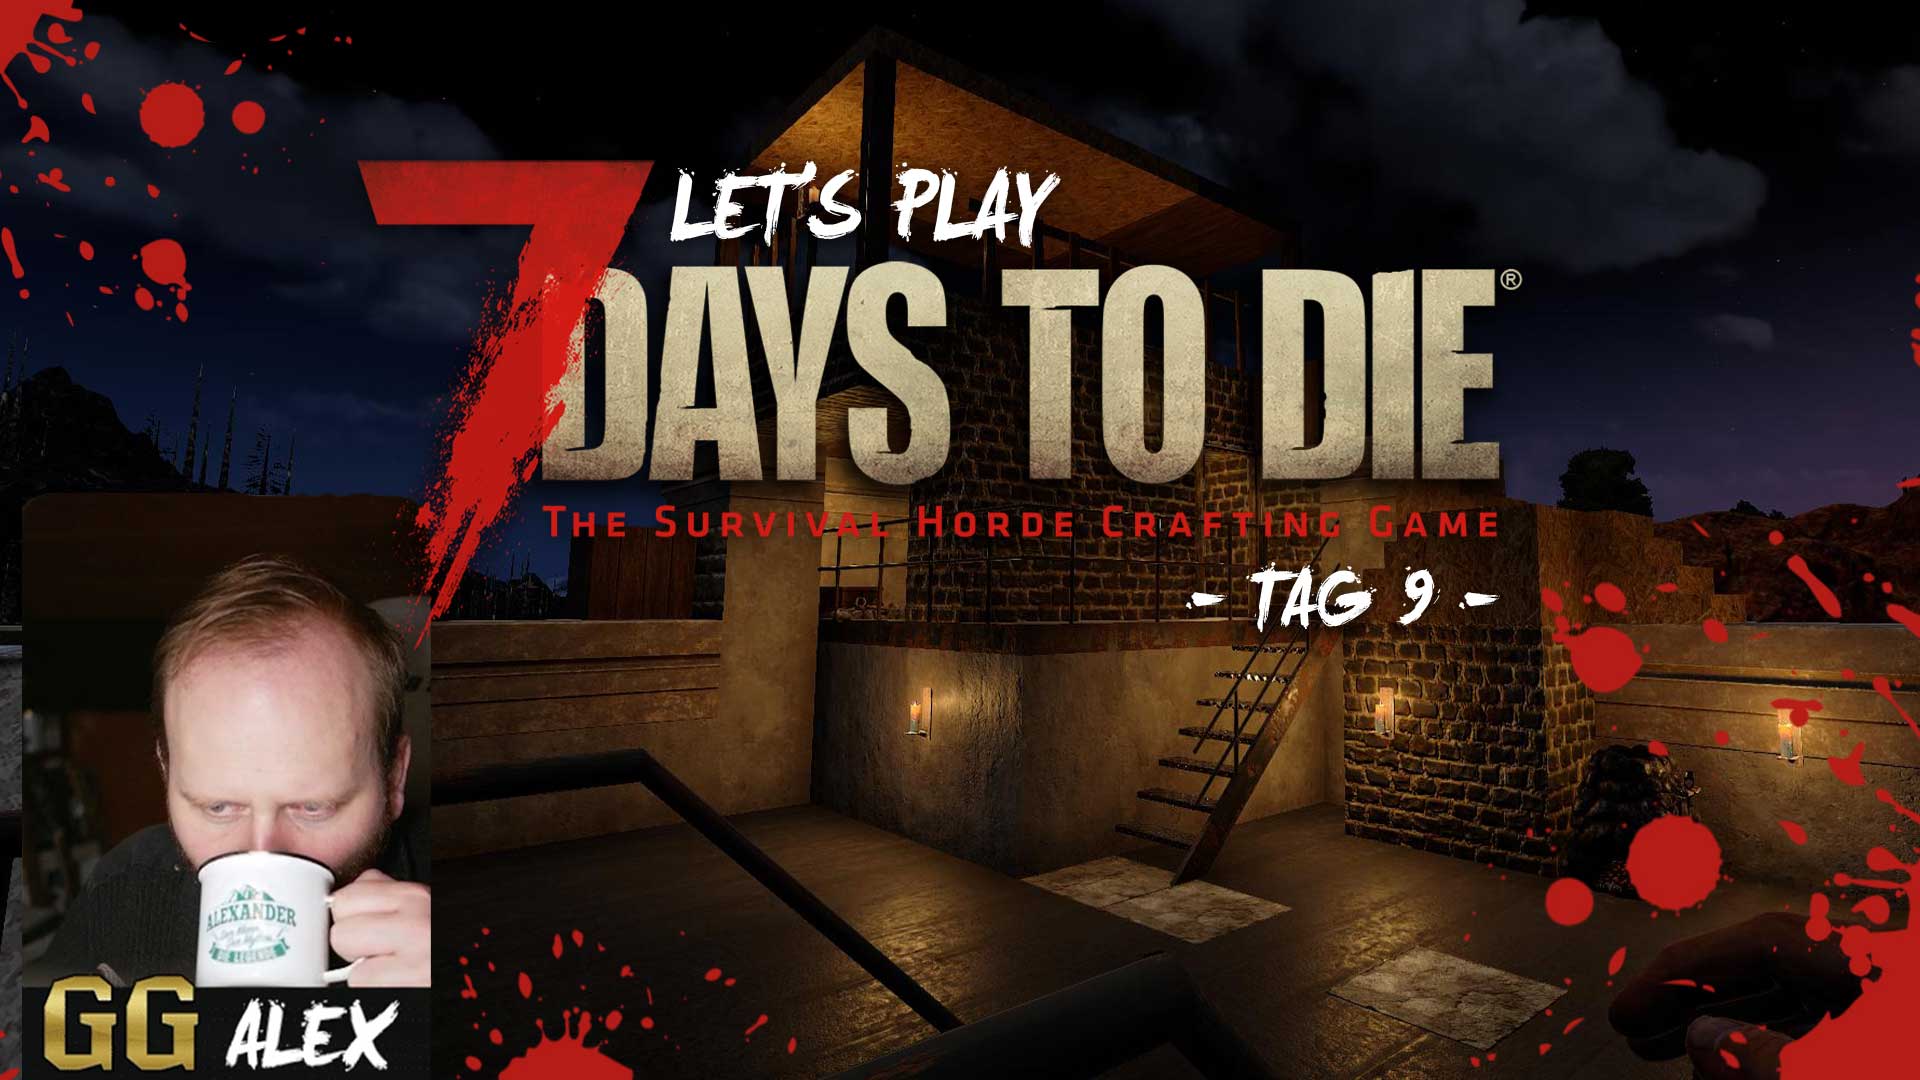 lets play 7 days to die tag 9 GG